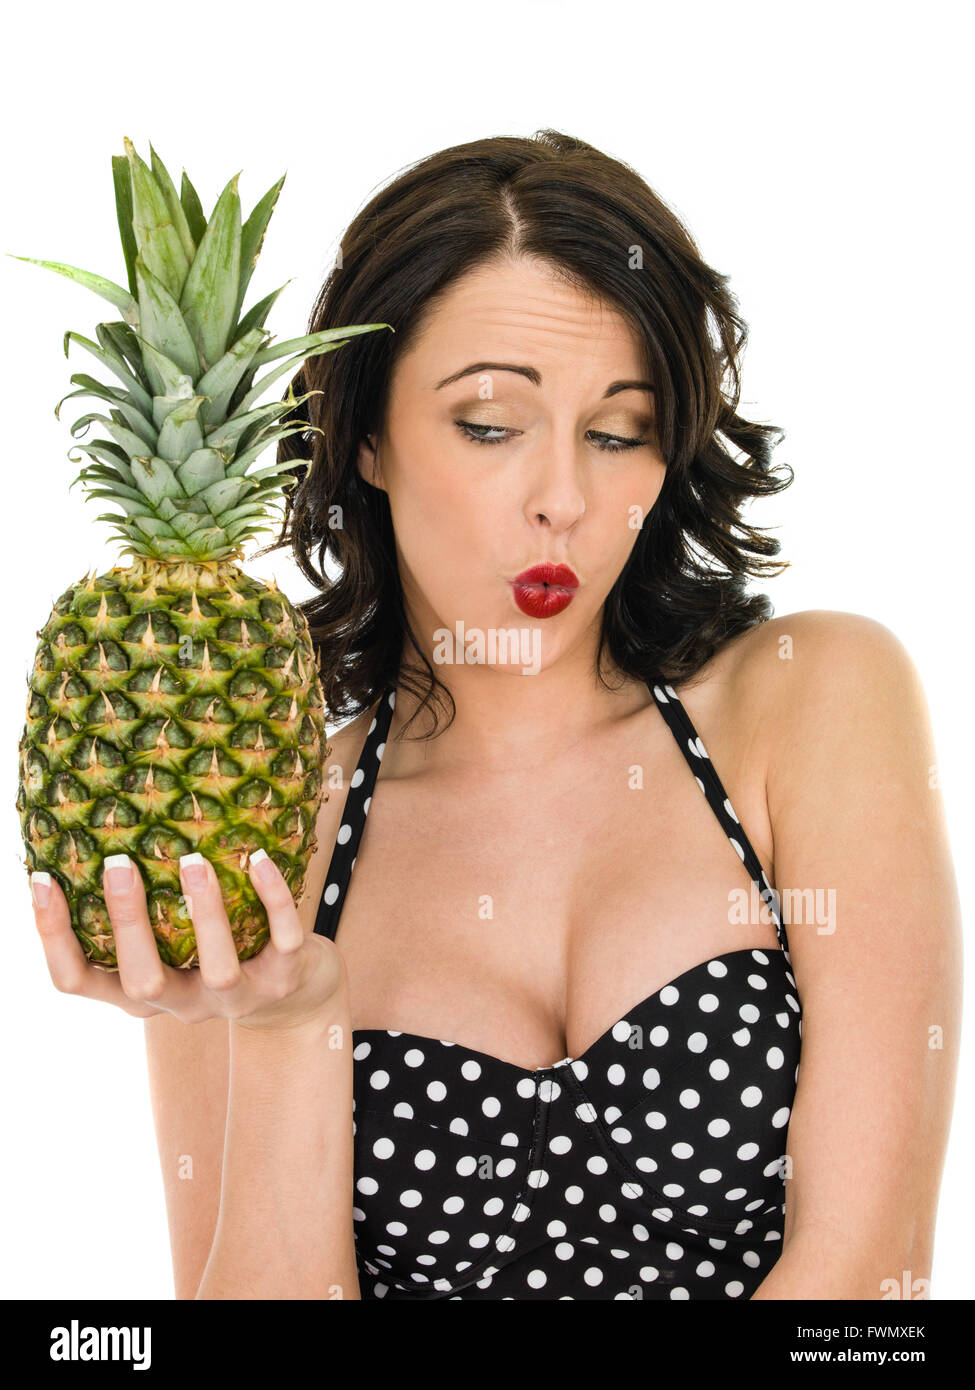 Healthy Attractive Young Woman Holding A Fresh Ripe Pineapple Isolated Against a White Background Stock Photo